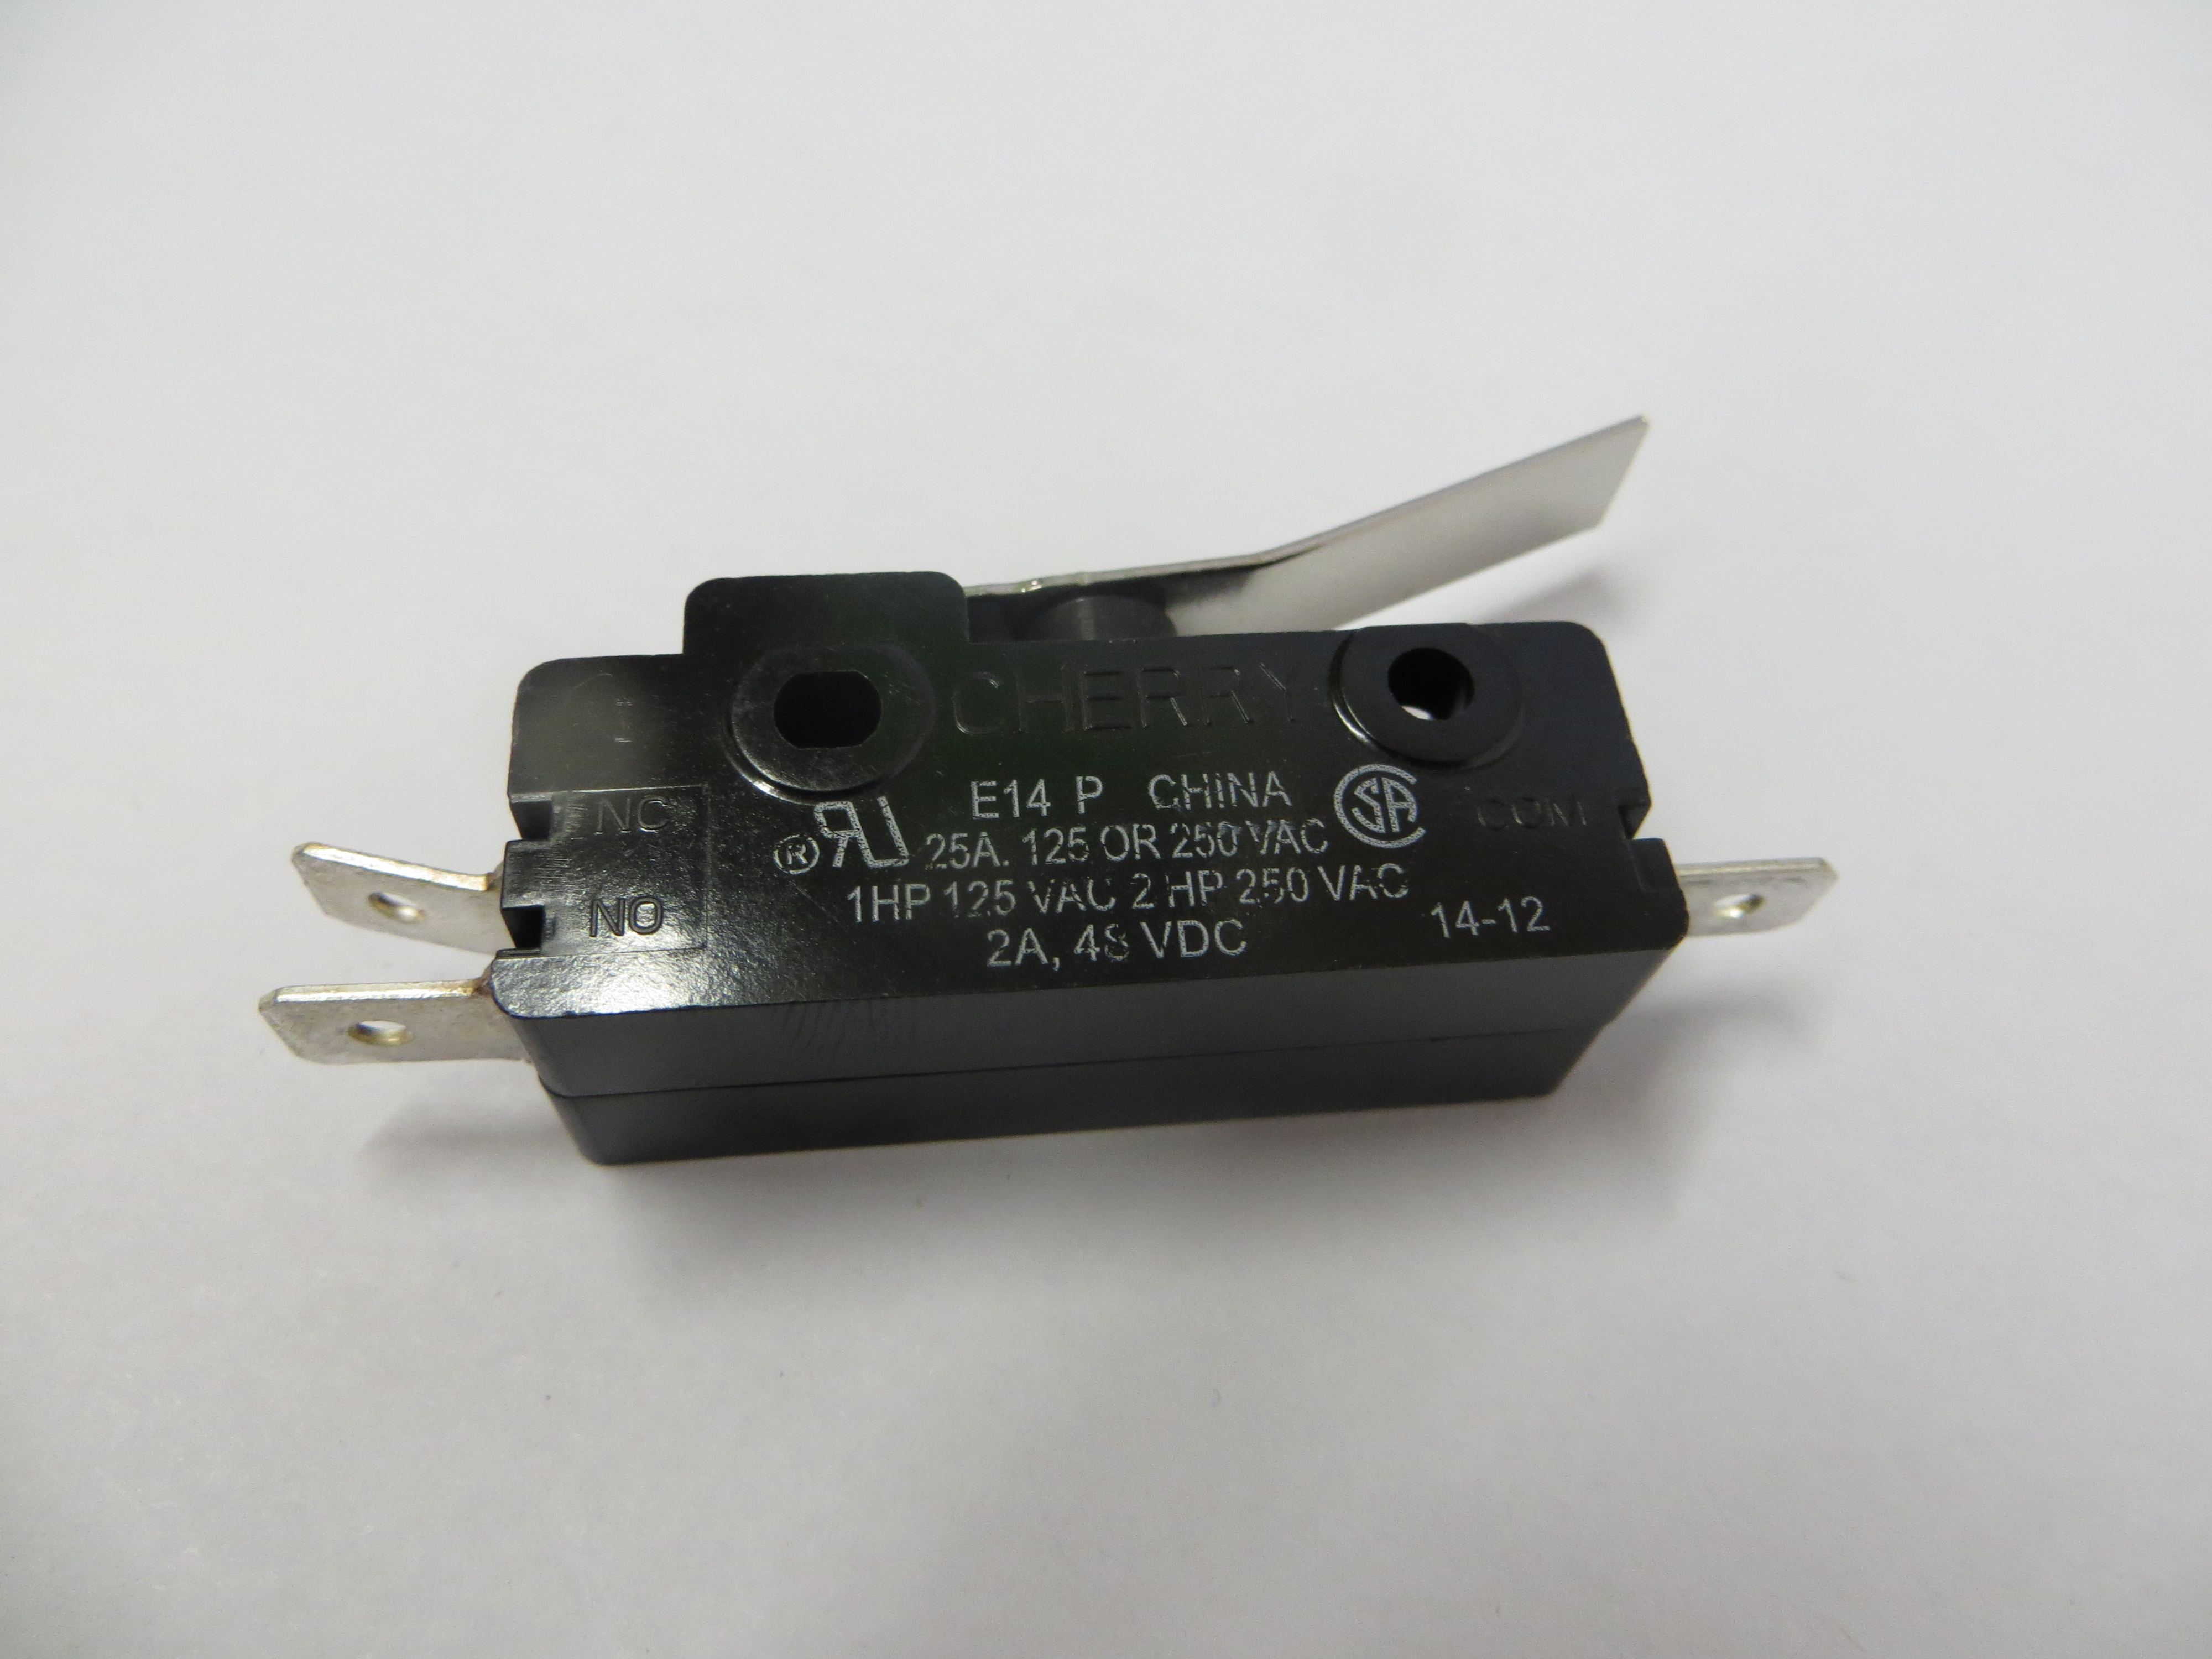 "B" COIN METER SWITCH M400947 